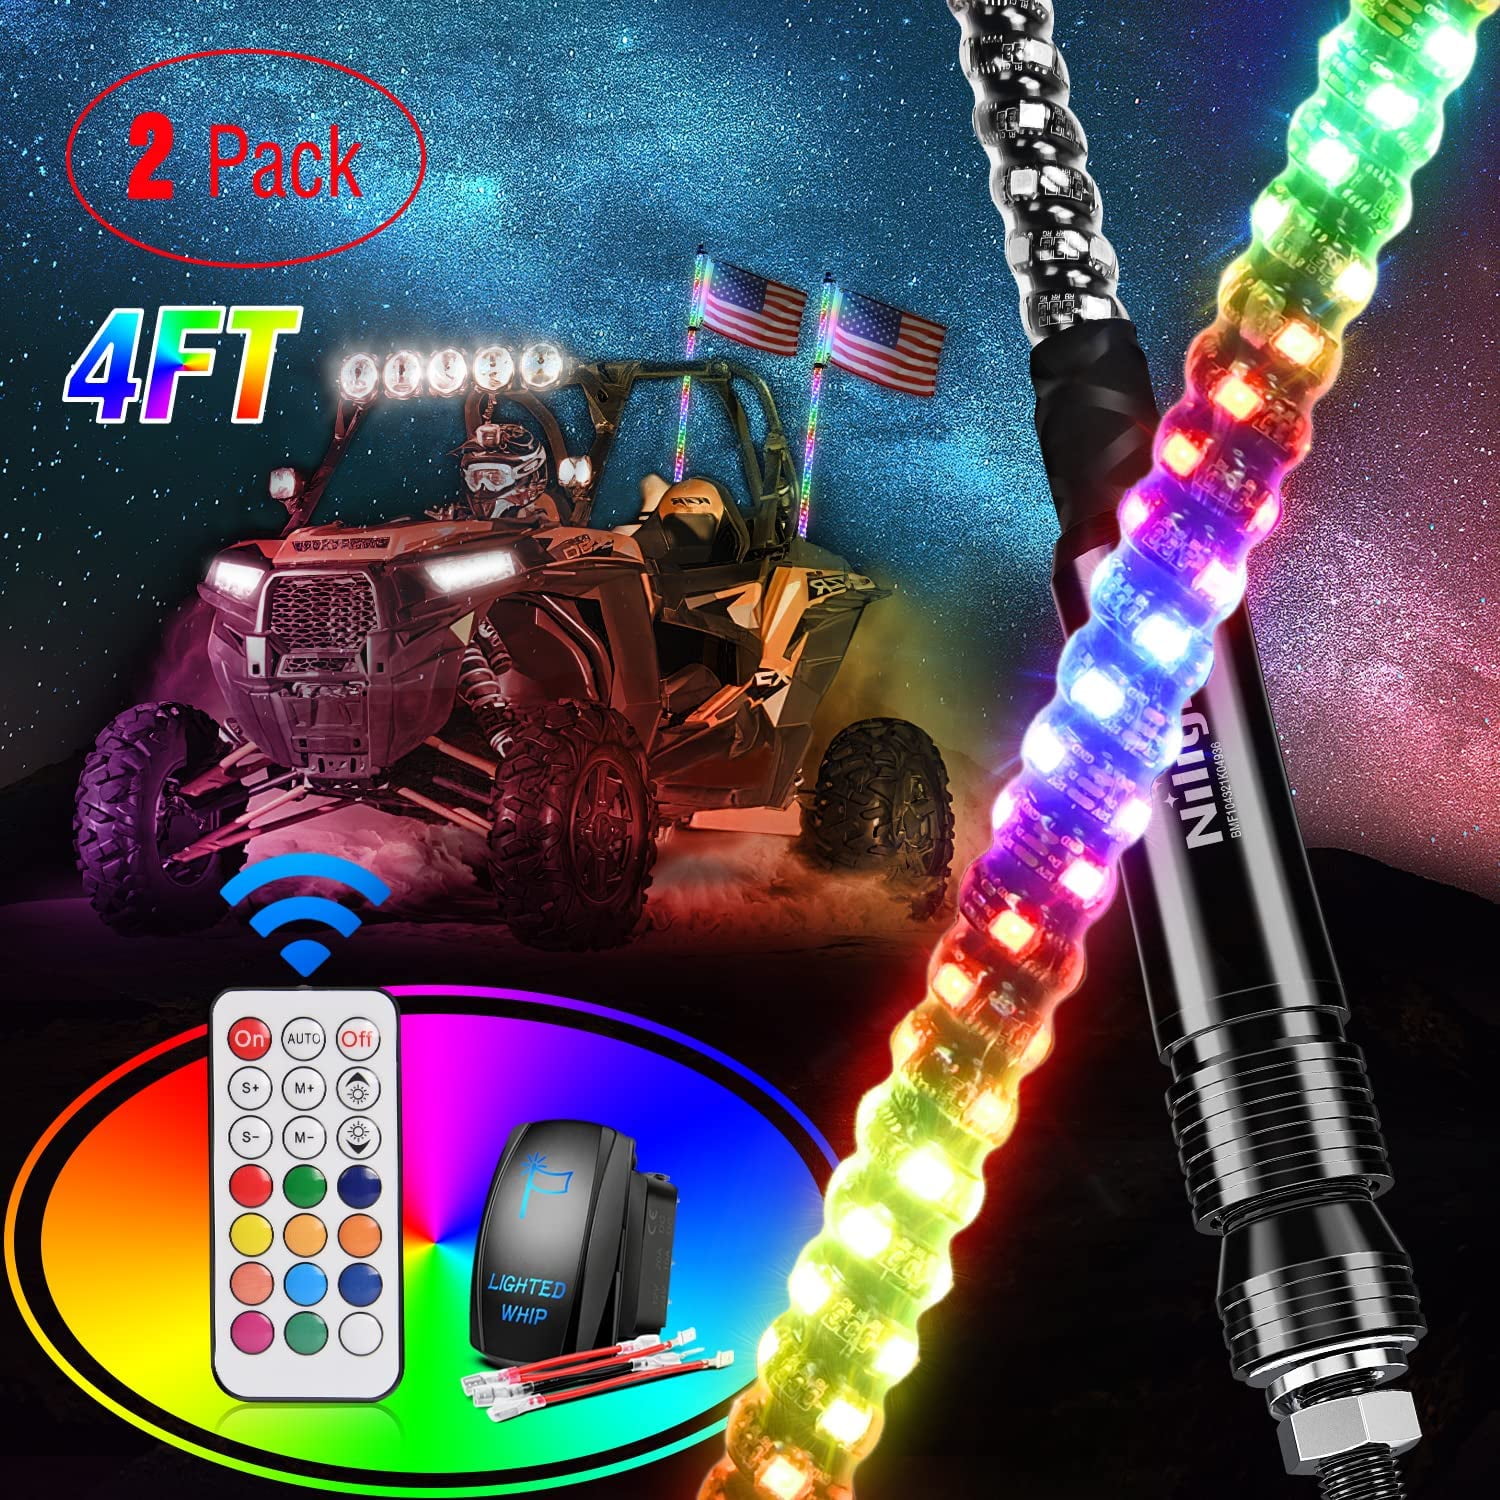 ACEC SHOP 3FT LED Whip Lights w/ Flag Smoked Black RGB Whip Light LED Lighted Antenna with RF Wireless Remote Offroad Chase Light for ATV UTV RZR Can-Am 4x4 Polaris Off Road Buggy Dune 